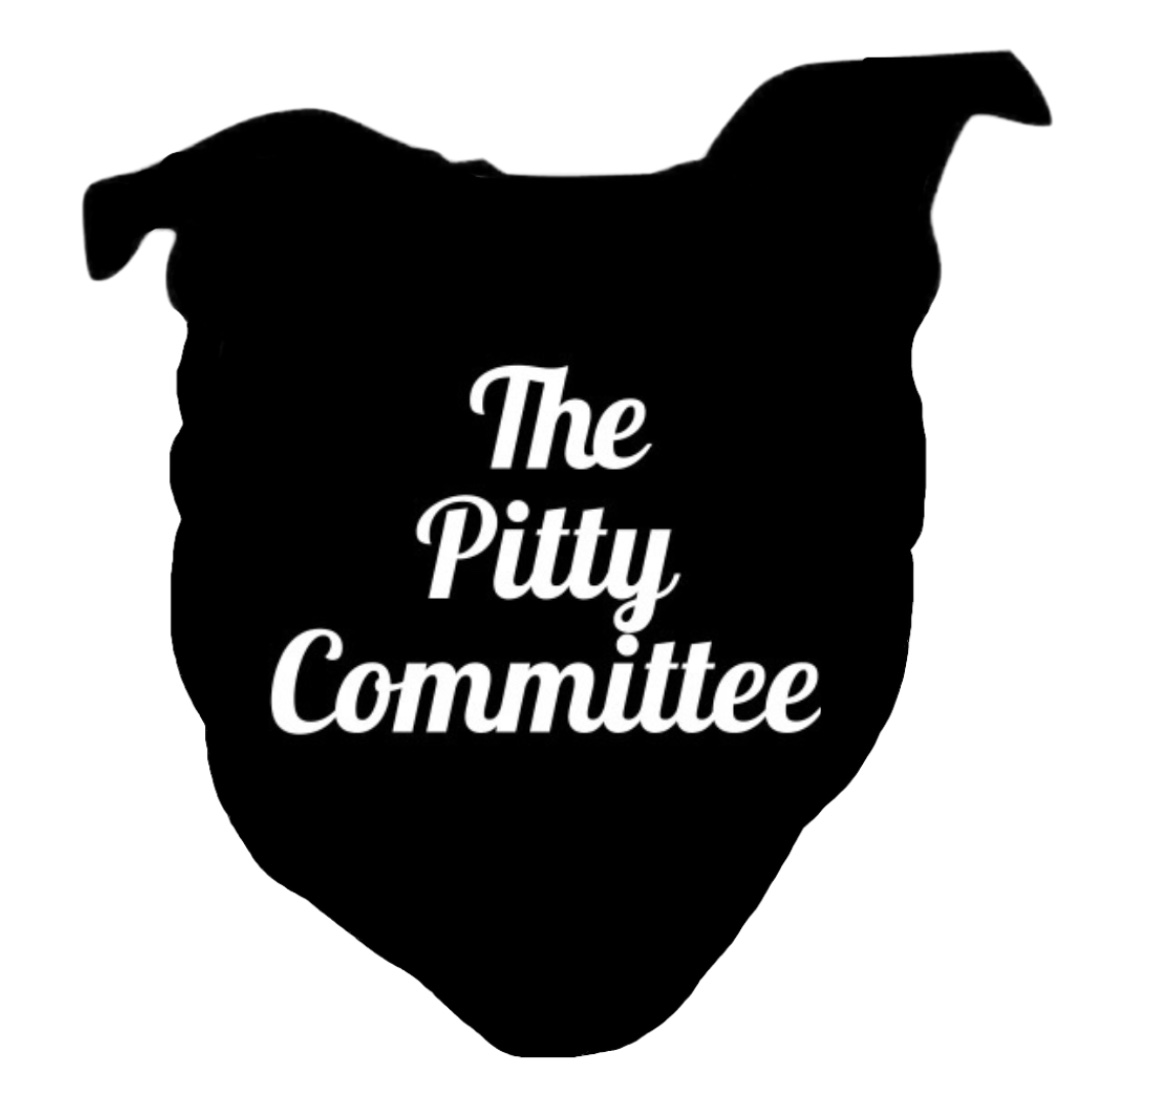 The Pitty Committee logo